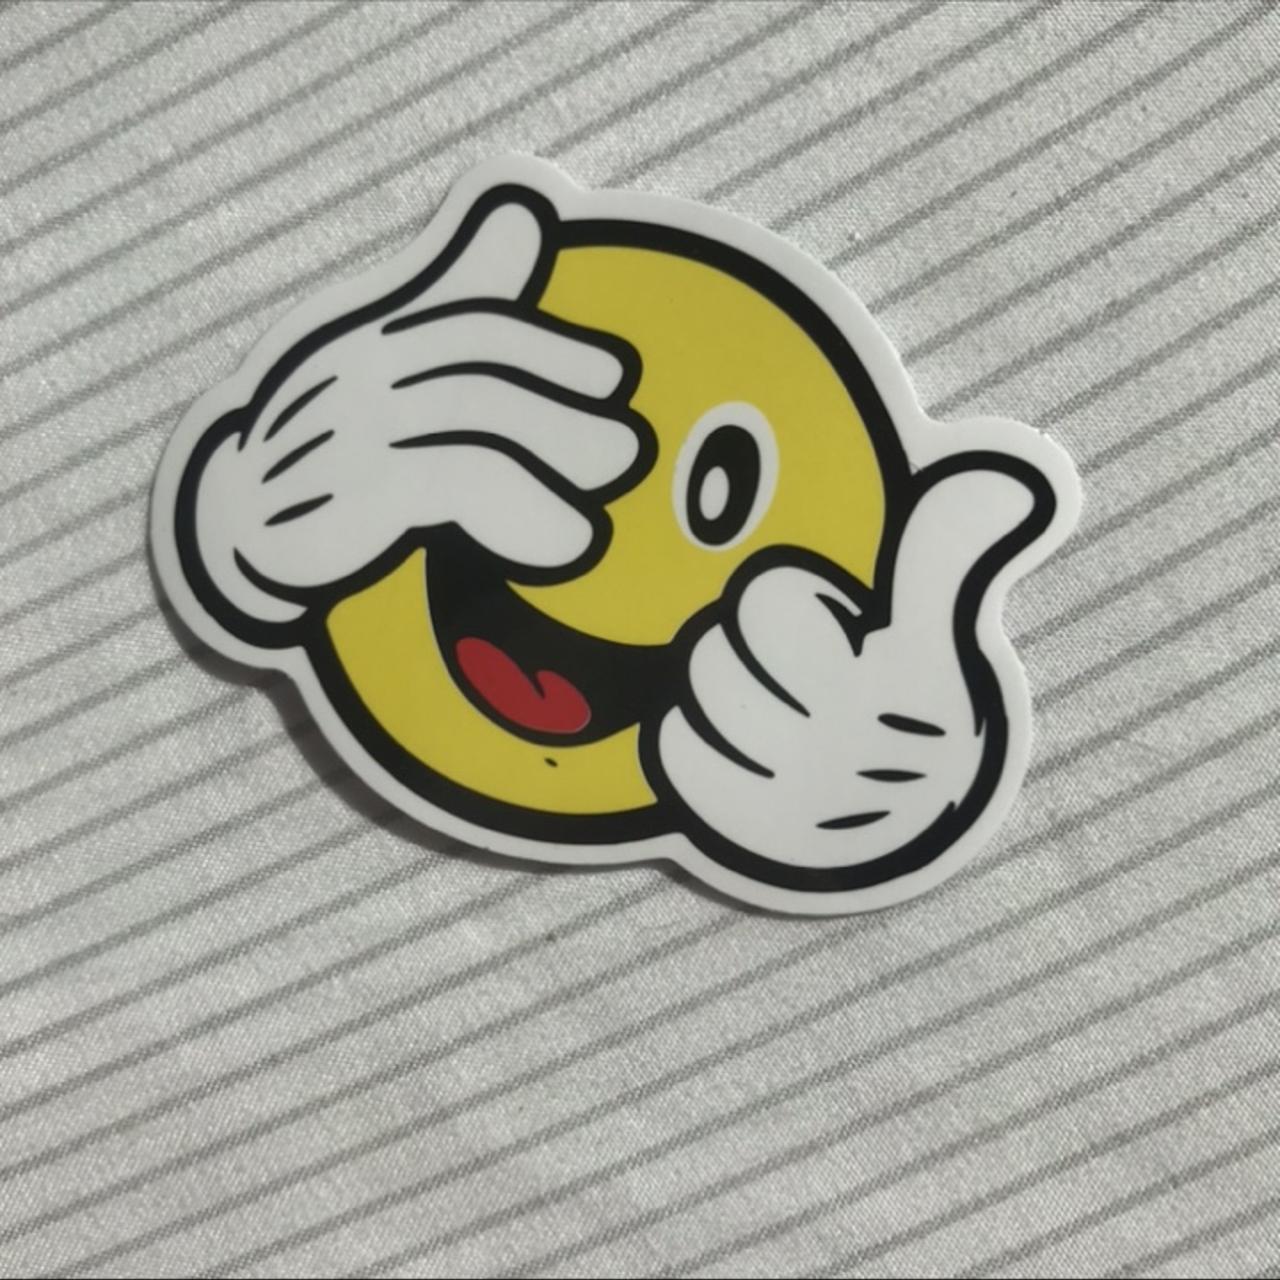 animated thumbs up smiley face vinyl sticker this - Depop